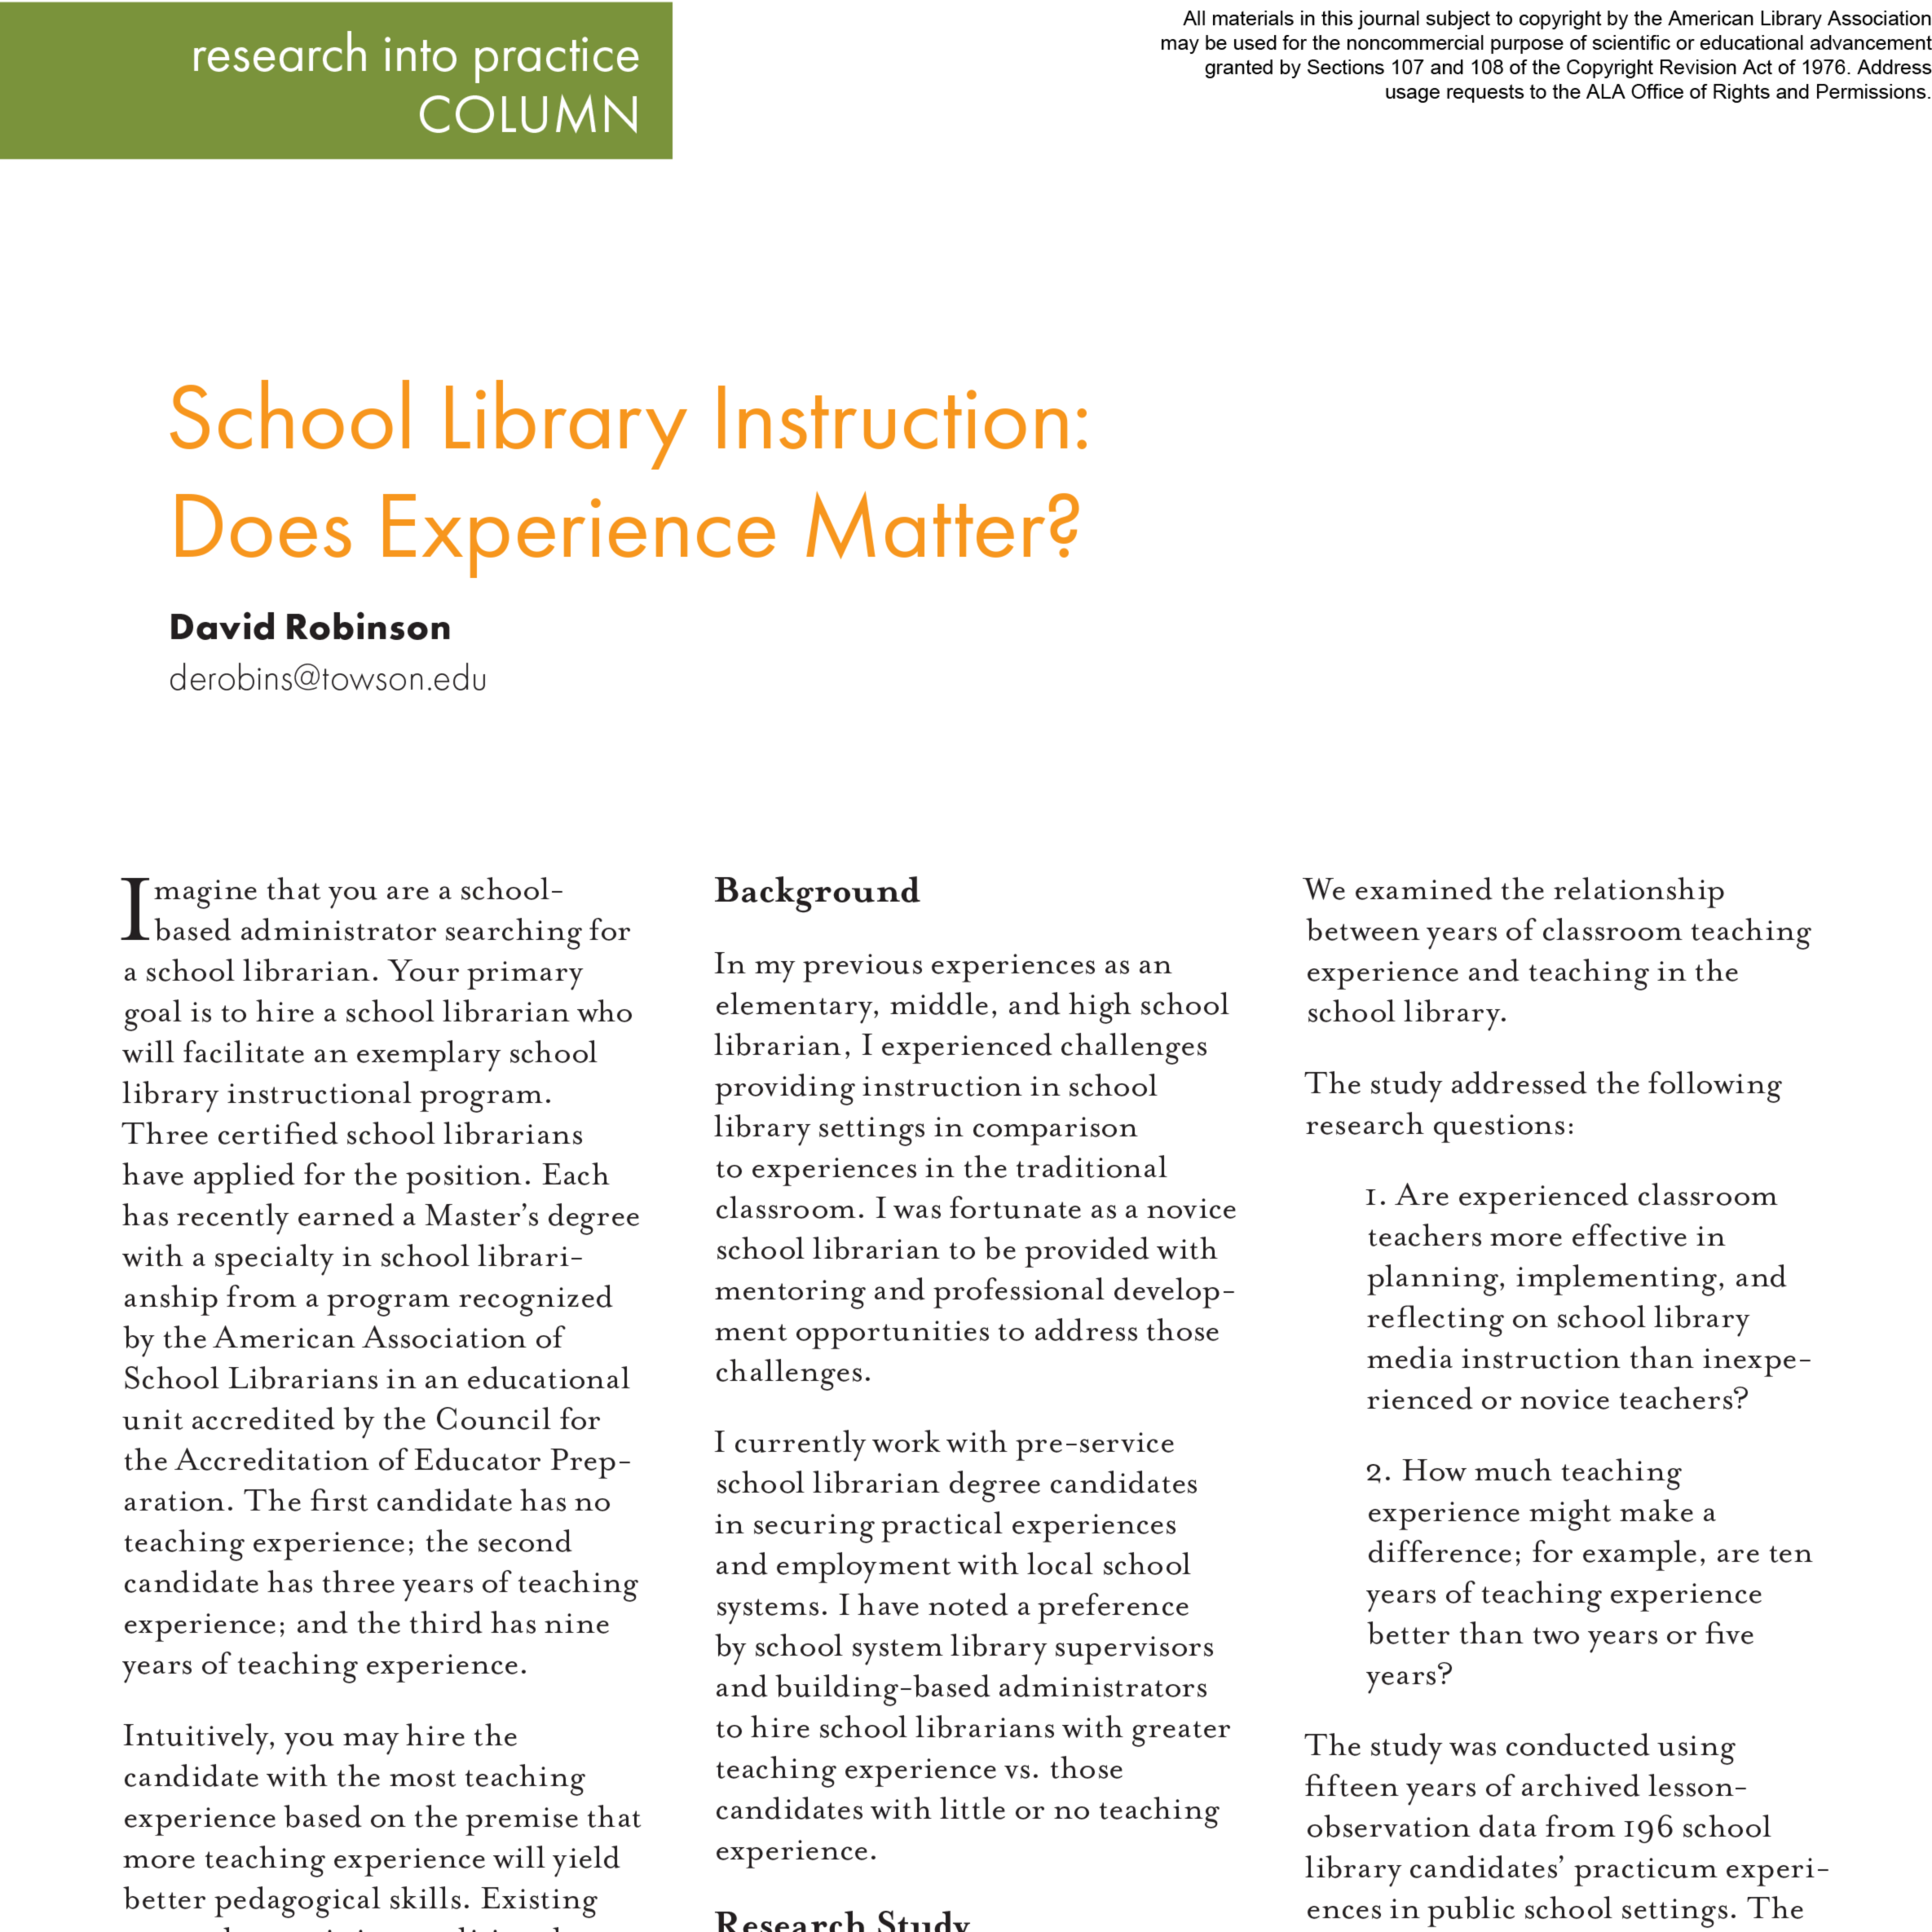 Research into Practice Column: School Library Instruction: Does Experience Matter? (Volume 50, No.5, pgs 60-63)